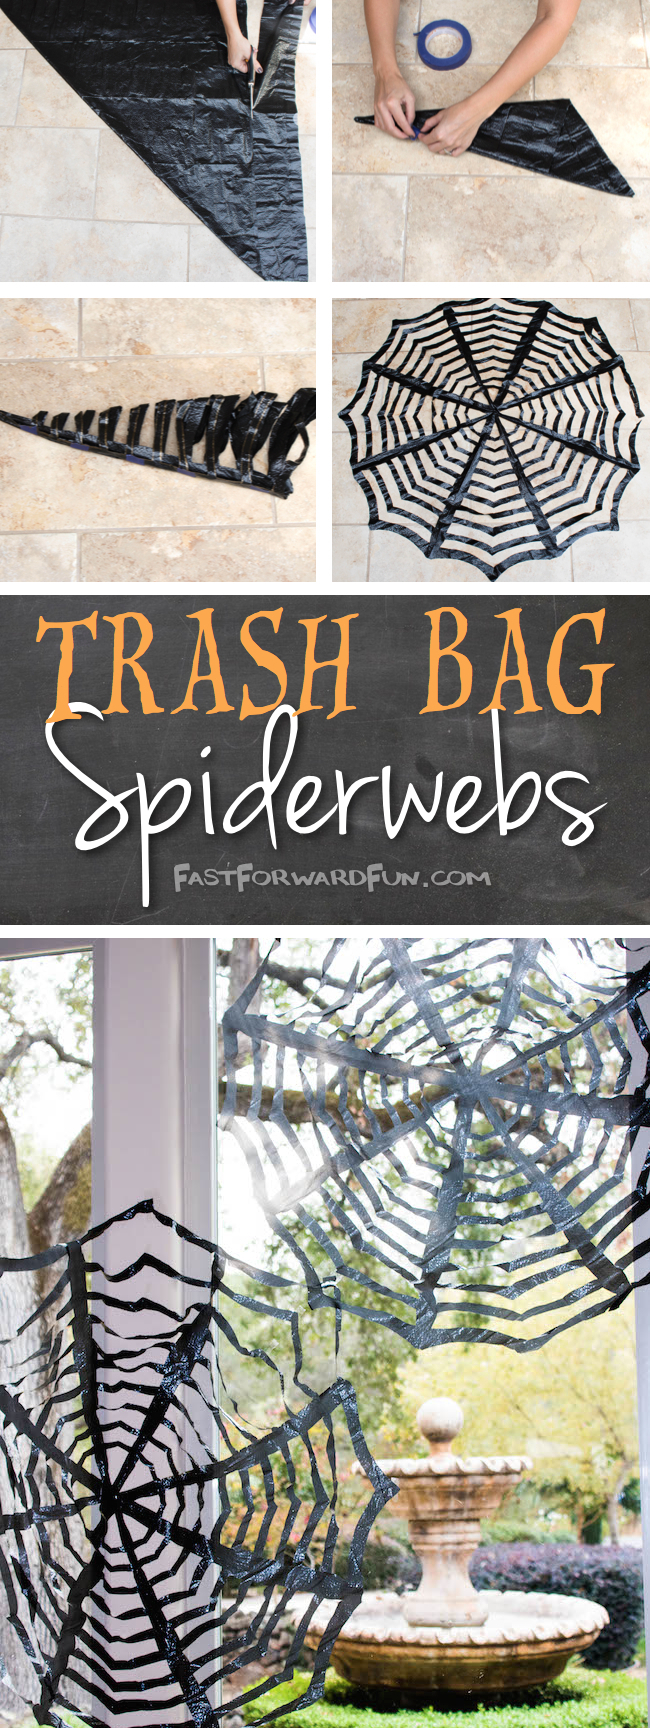 Easy DIY Trashbag Spiderweb Tutorial -- Fun video and lots of step-by-step photos! Perfect for Halloween.